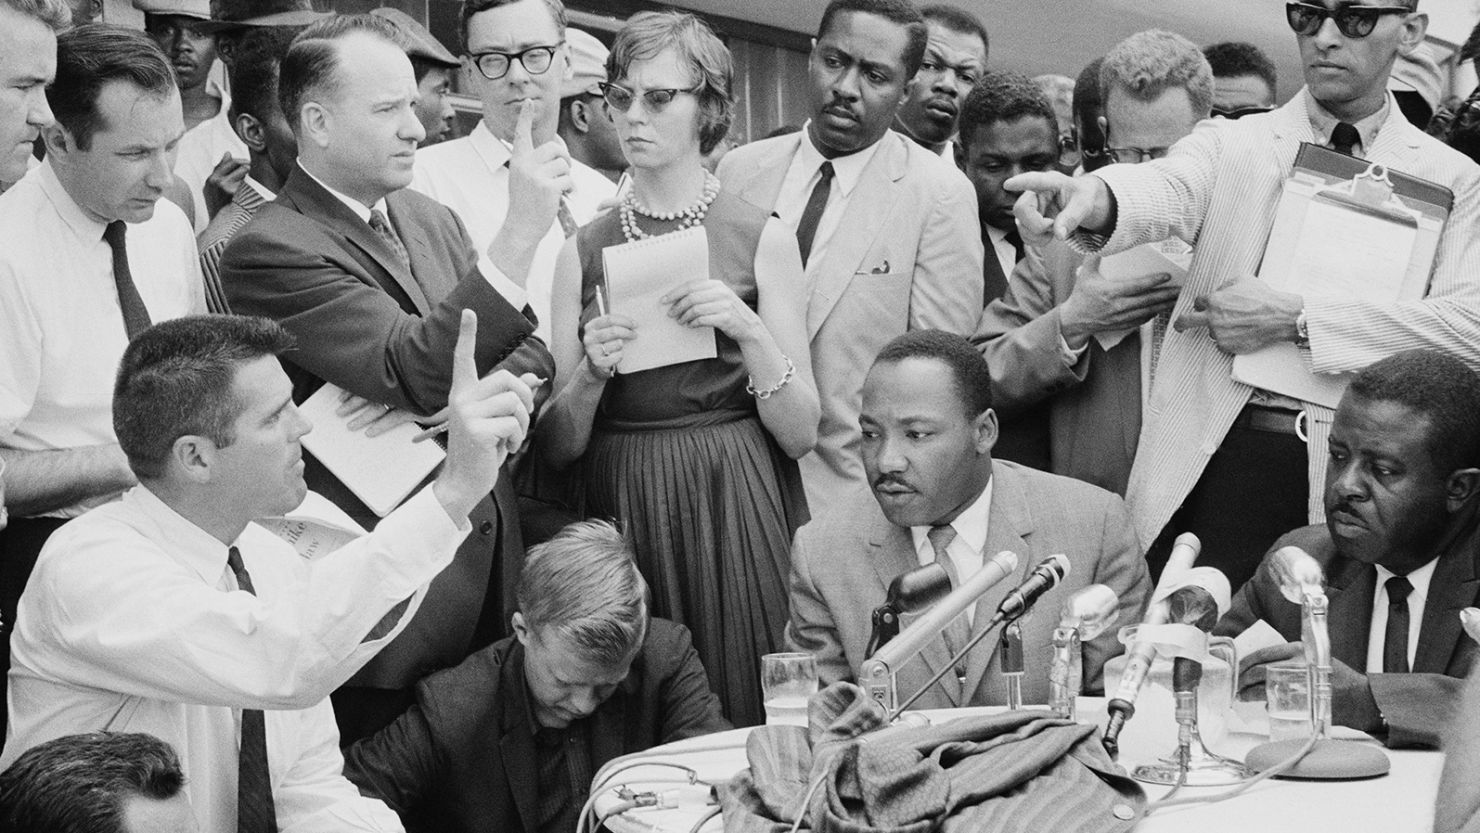 American Baptist minister and civil rights leader Martin Luther King Jr (1929 - 1968, seated, centre-right) gives a press conference regarding an agreement reached on a 'limited desegregation plan' outside the A.G. Gaston Motel in Birmingham, Alabama, February 1963. Standing behind Luther King is his speechwriter Clarence B. Jones.